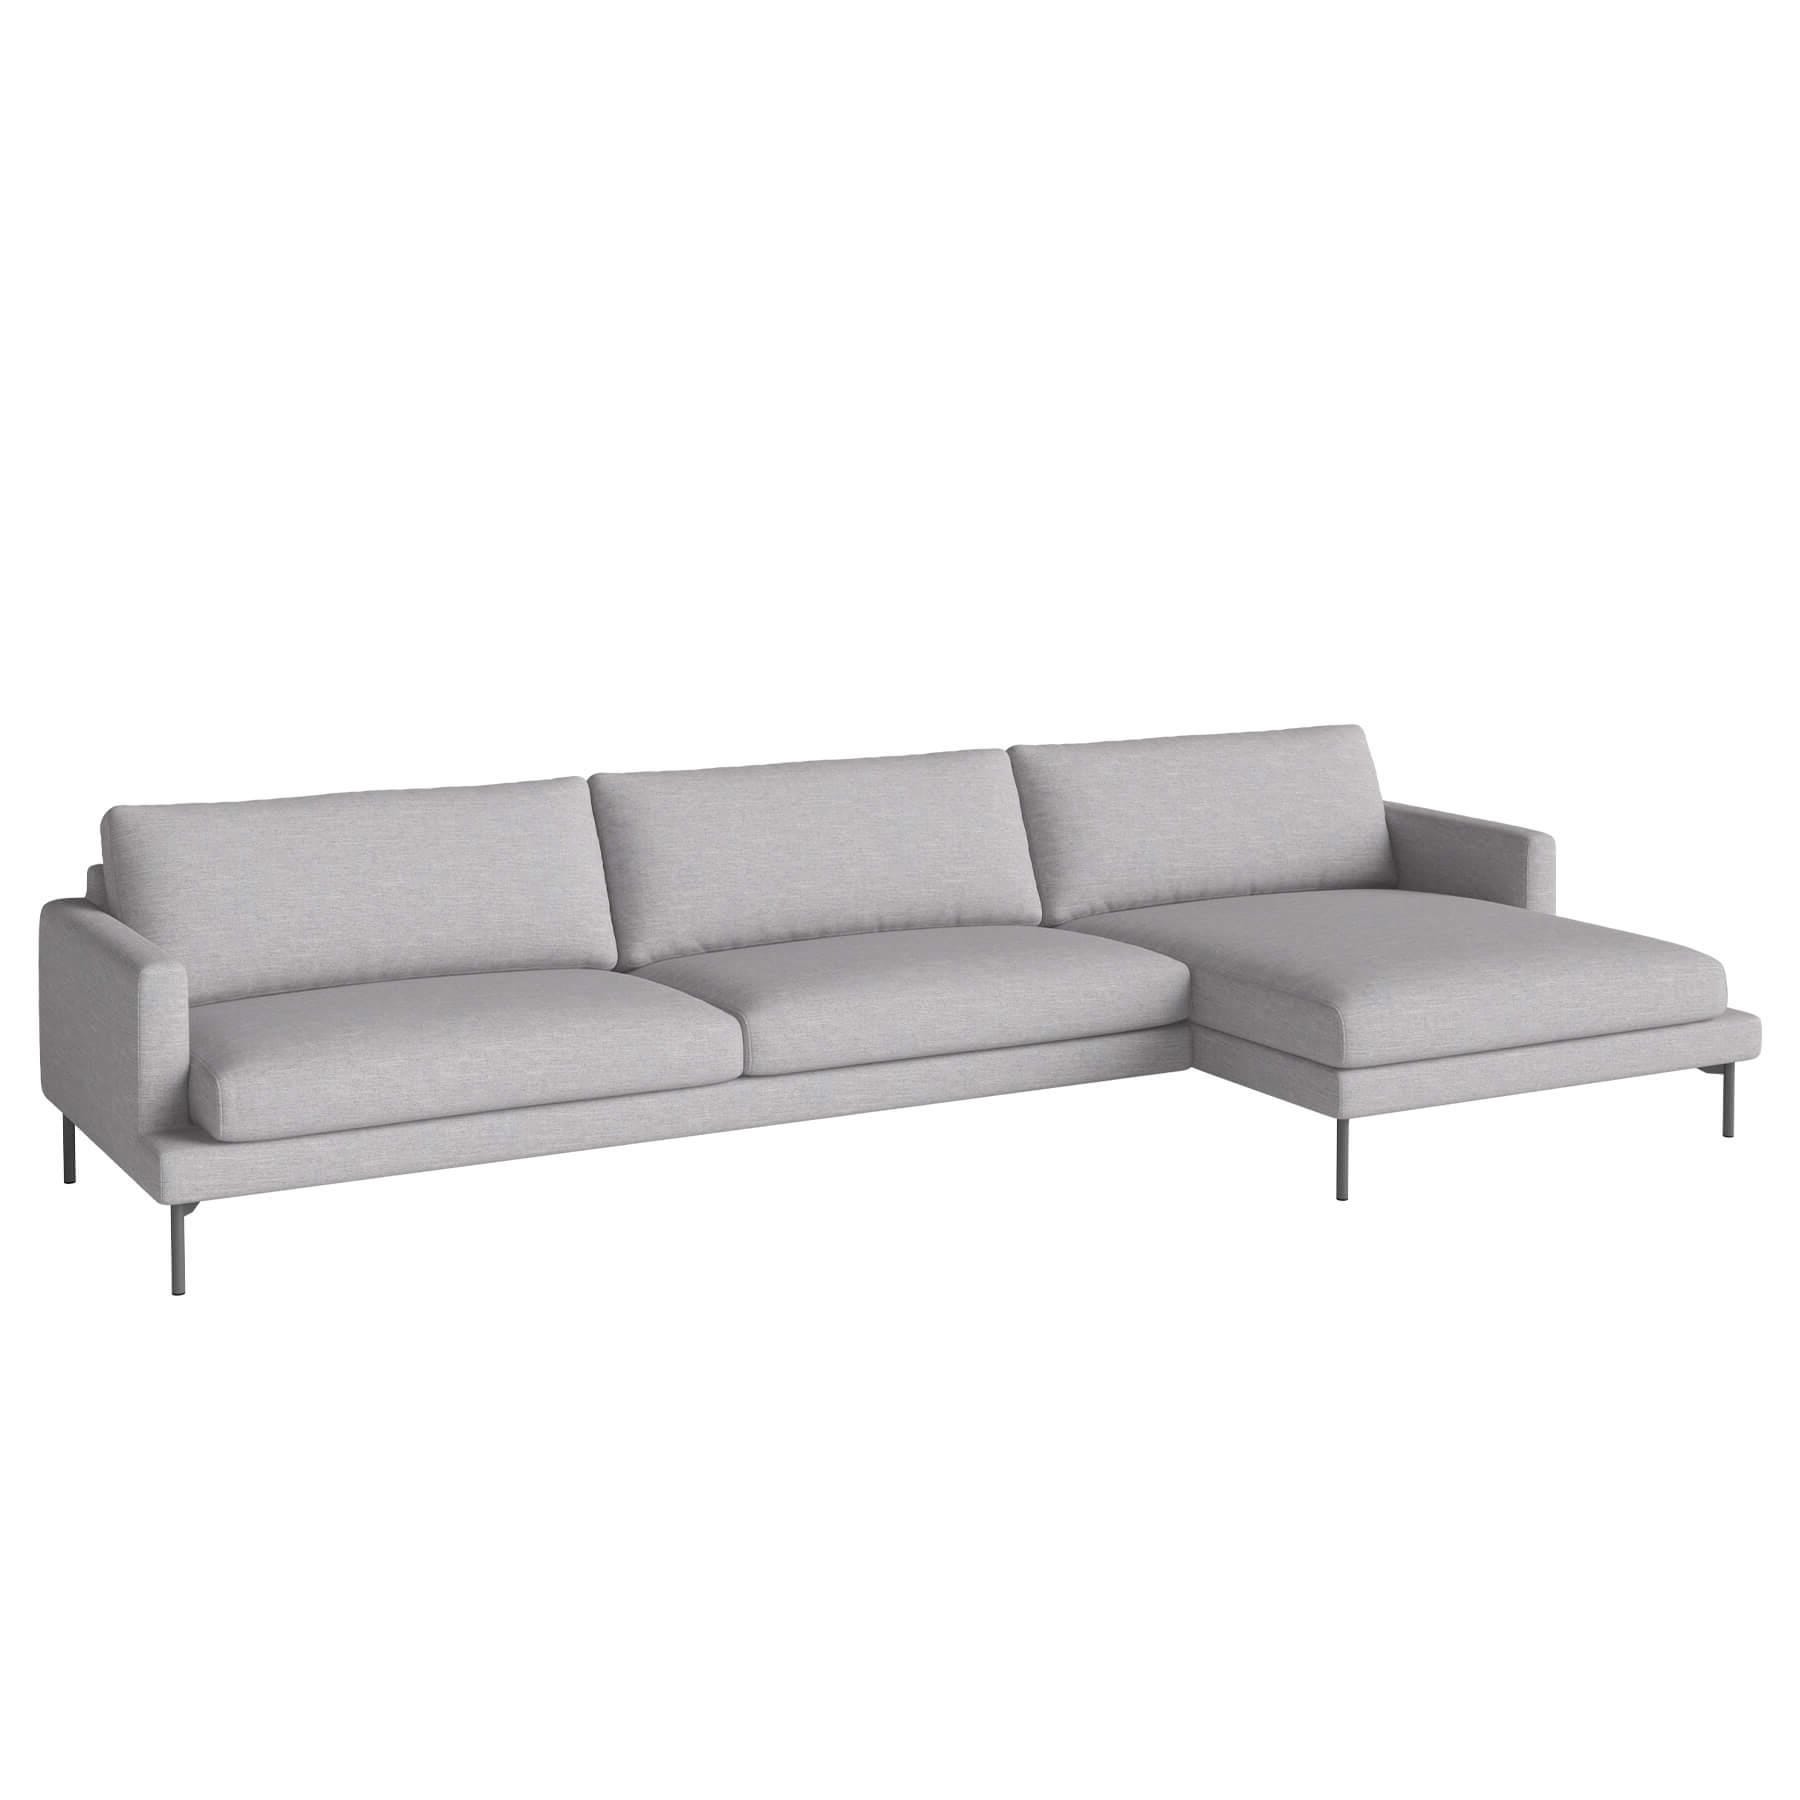 Bolia Veneda Sofa 45 Seater Sofa With Chaise Longue Grey Laquered Steel Baize Light Grey Right Designer Furniture From Holloways Of Ludlow